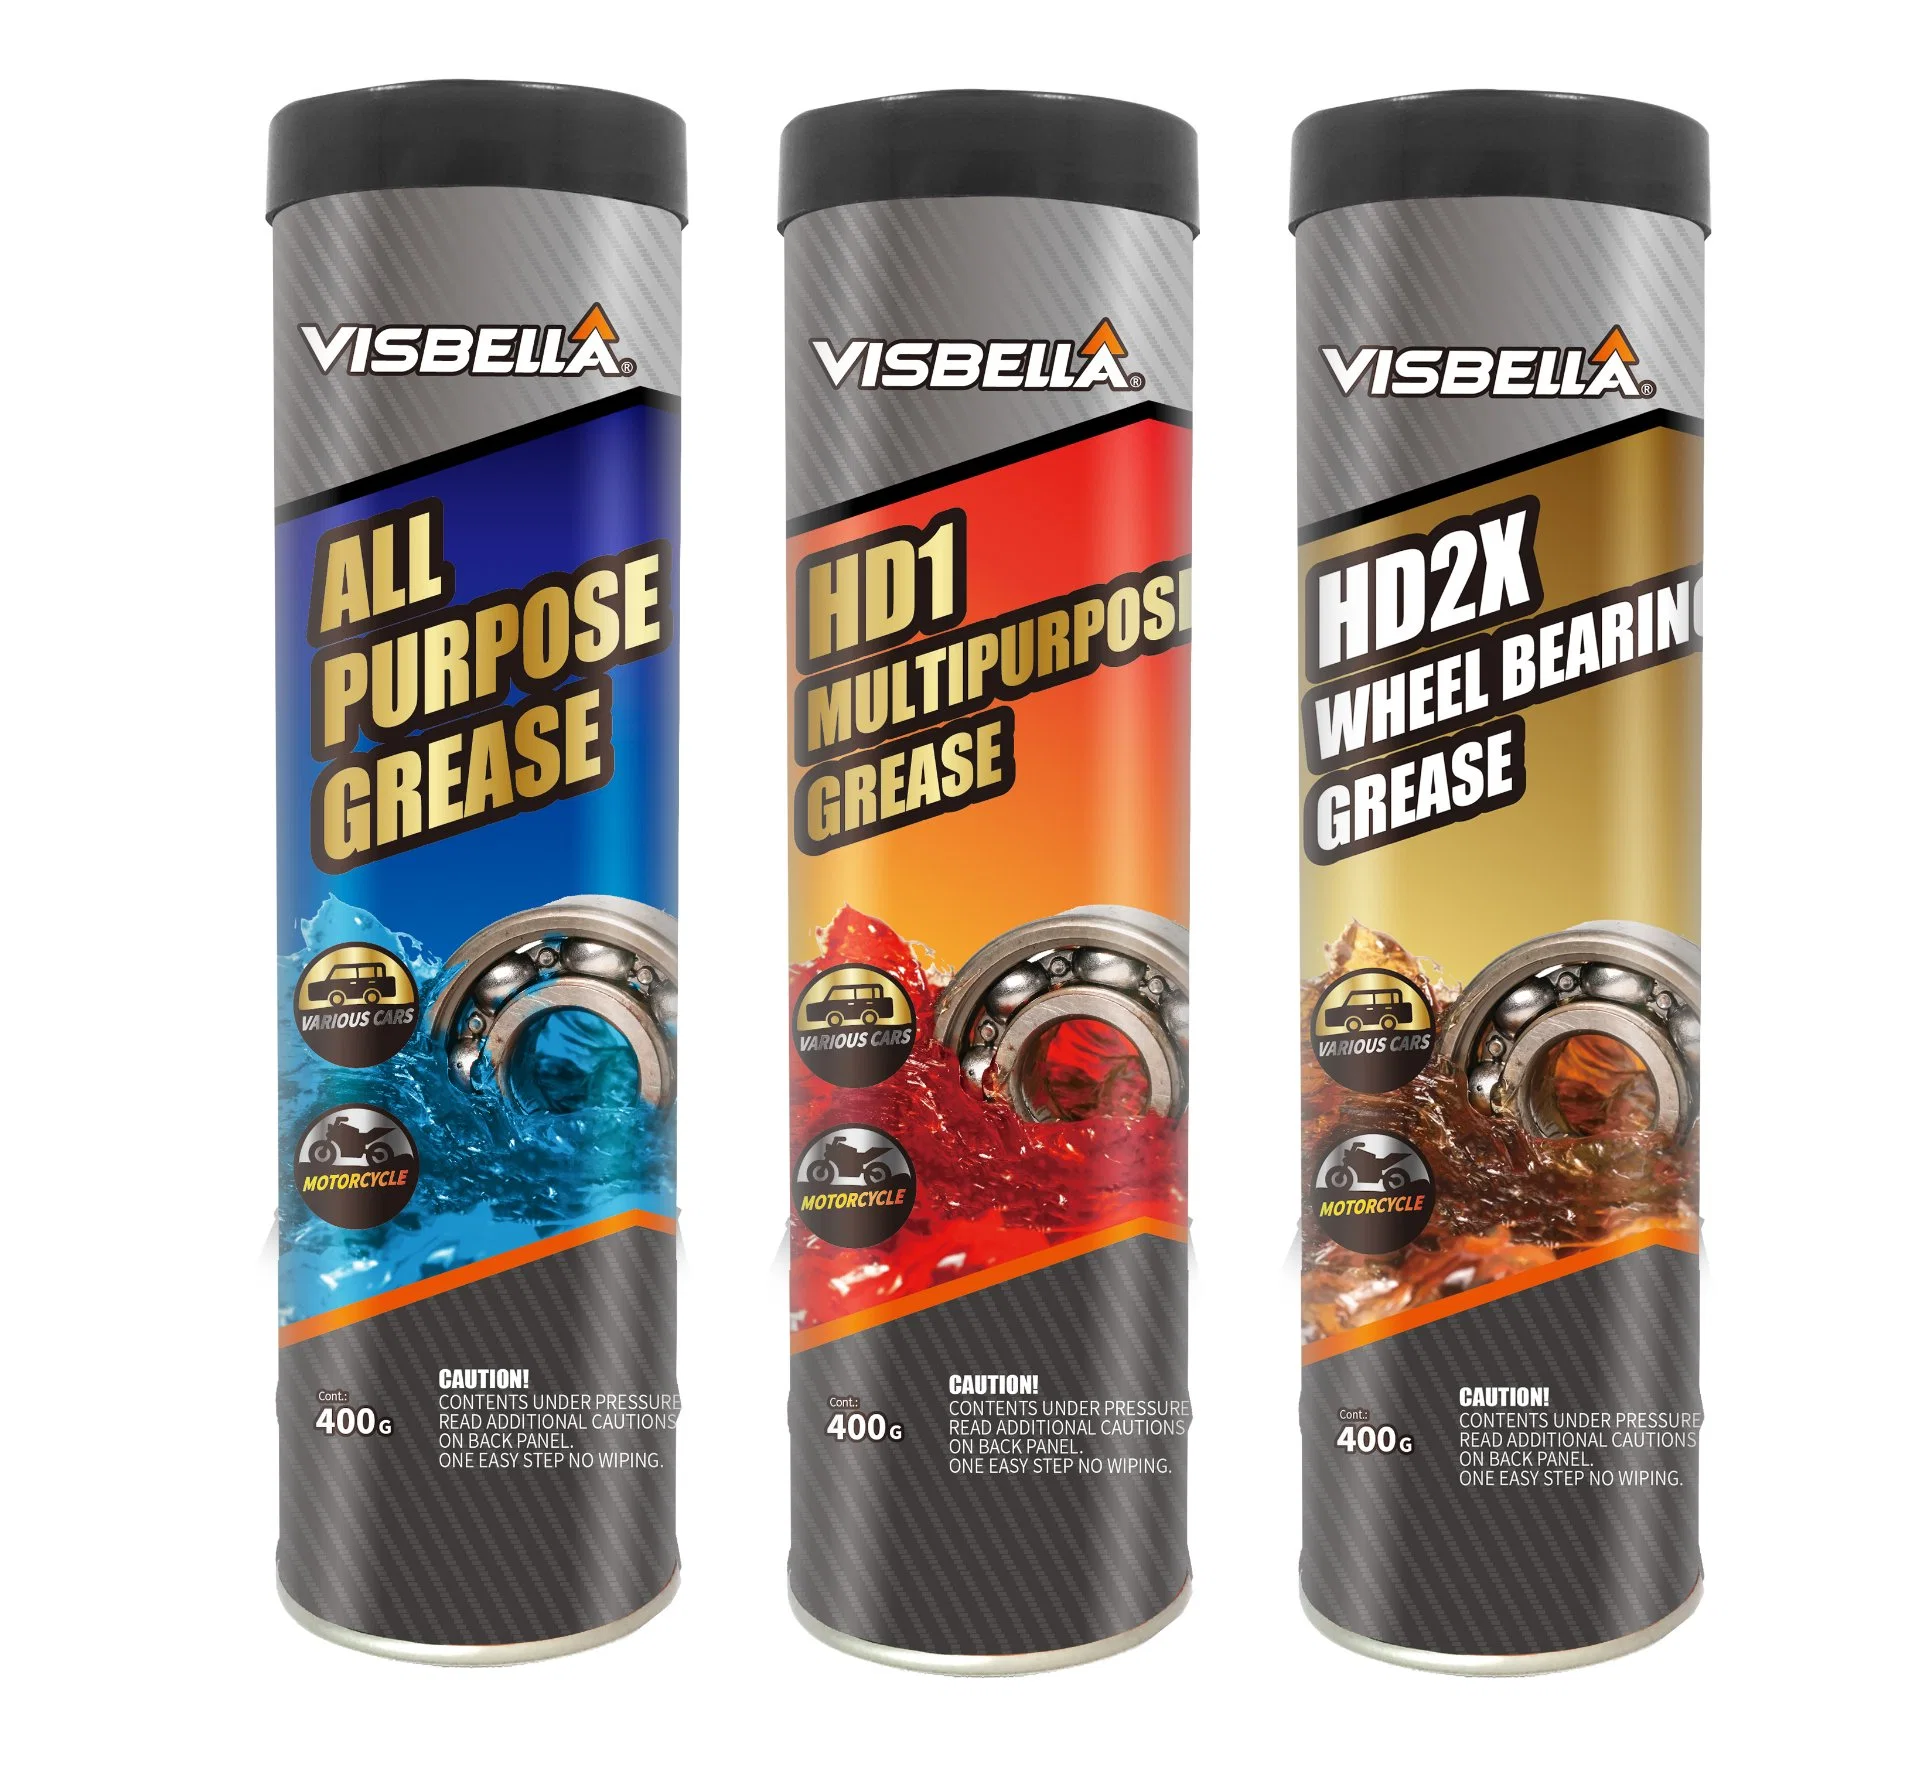 Lubricating Grease Protection From Rust and Corrosion (400G)